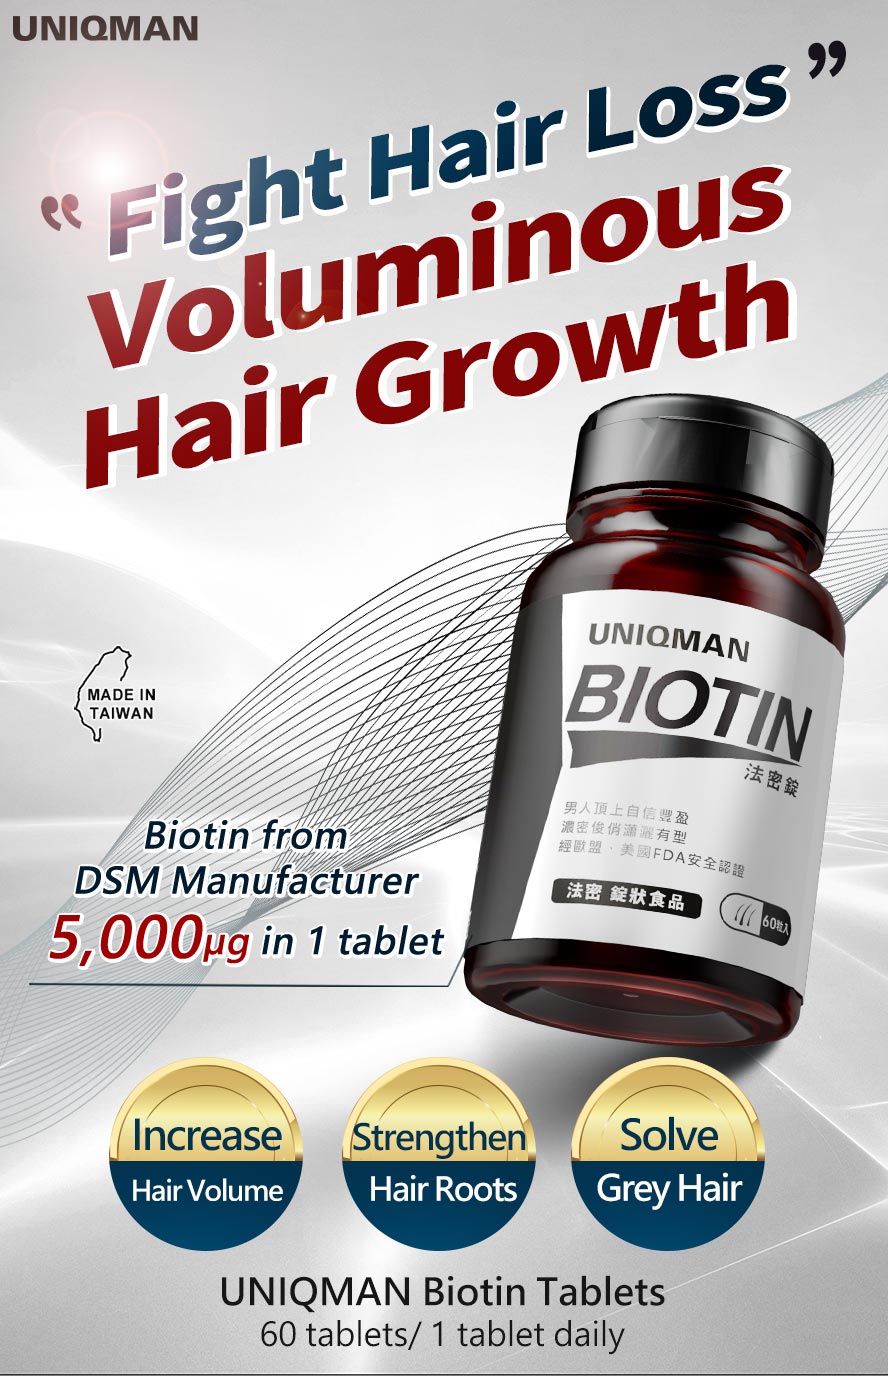 UNIQMAN Biotin has high dose patented biotin for great hair growth to treat hair loss and grey hair.